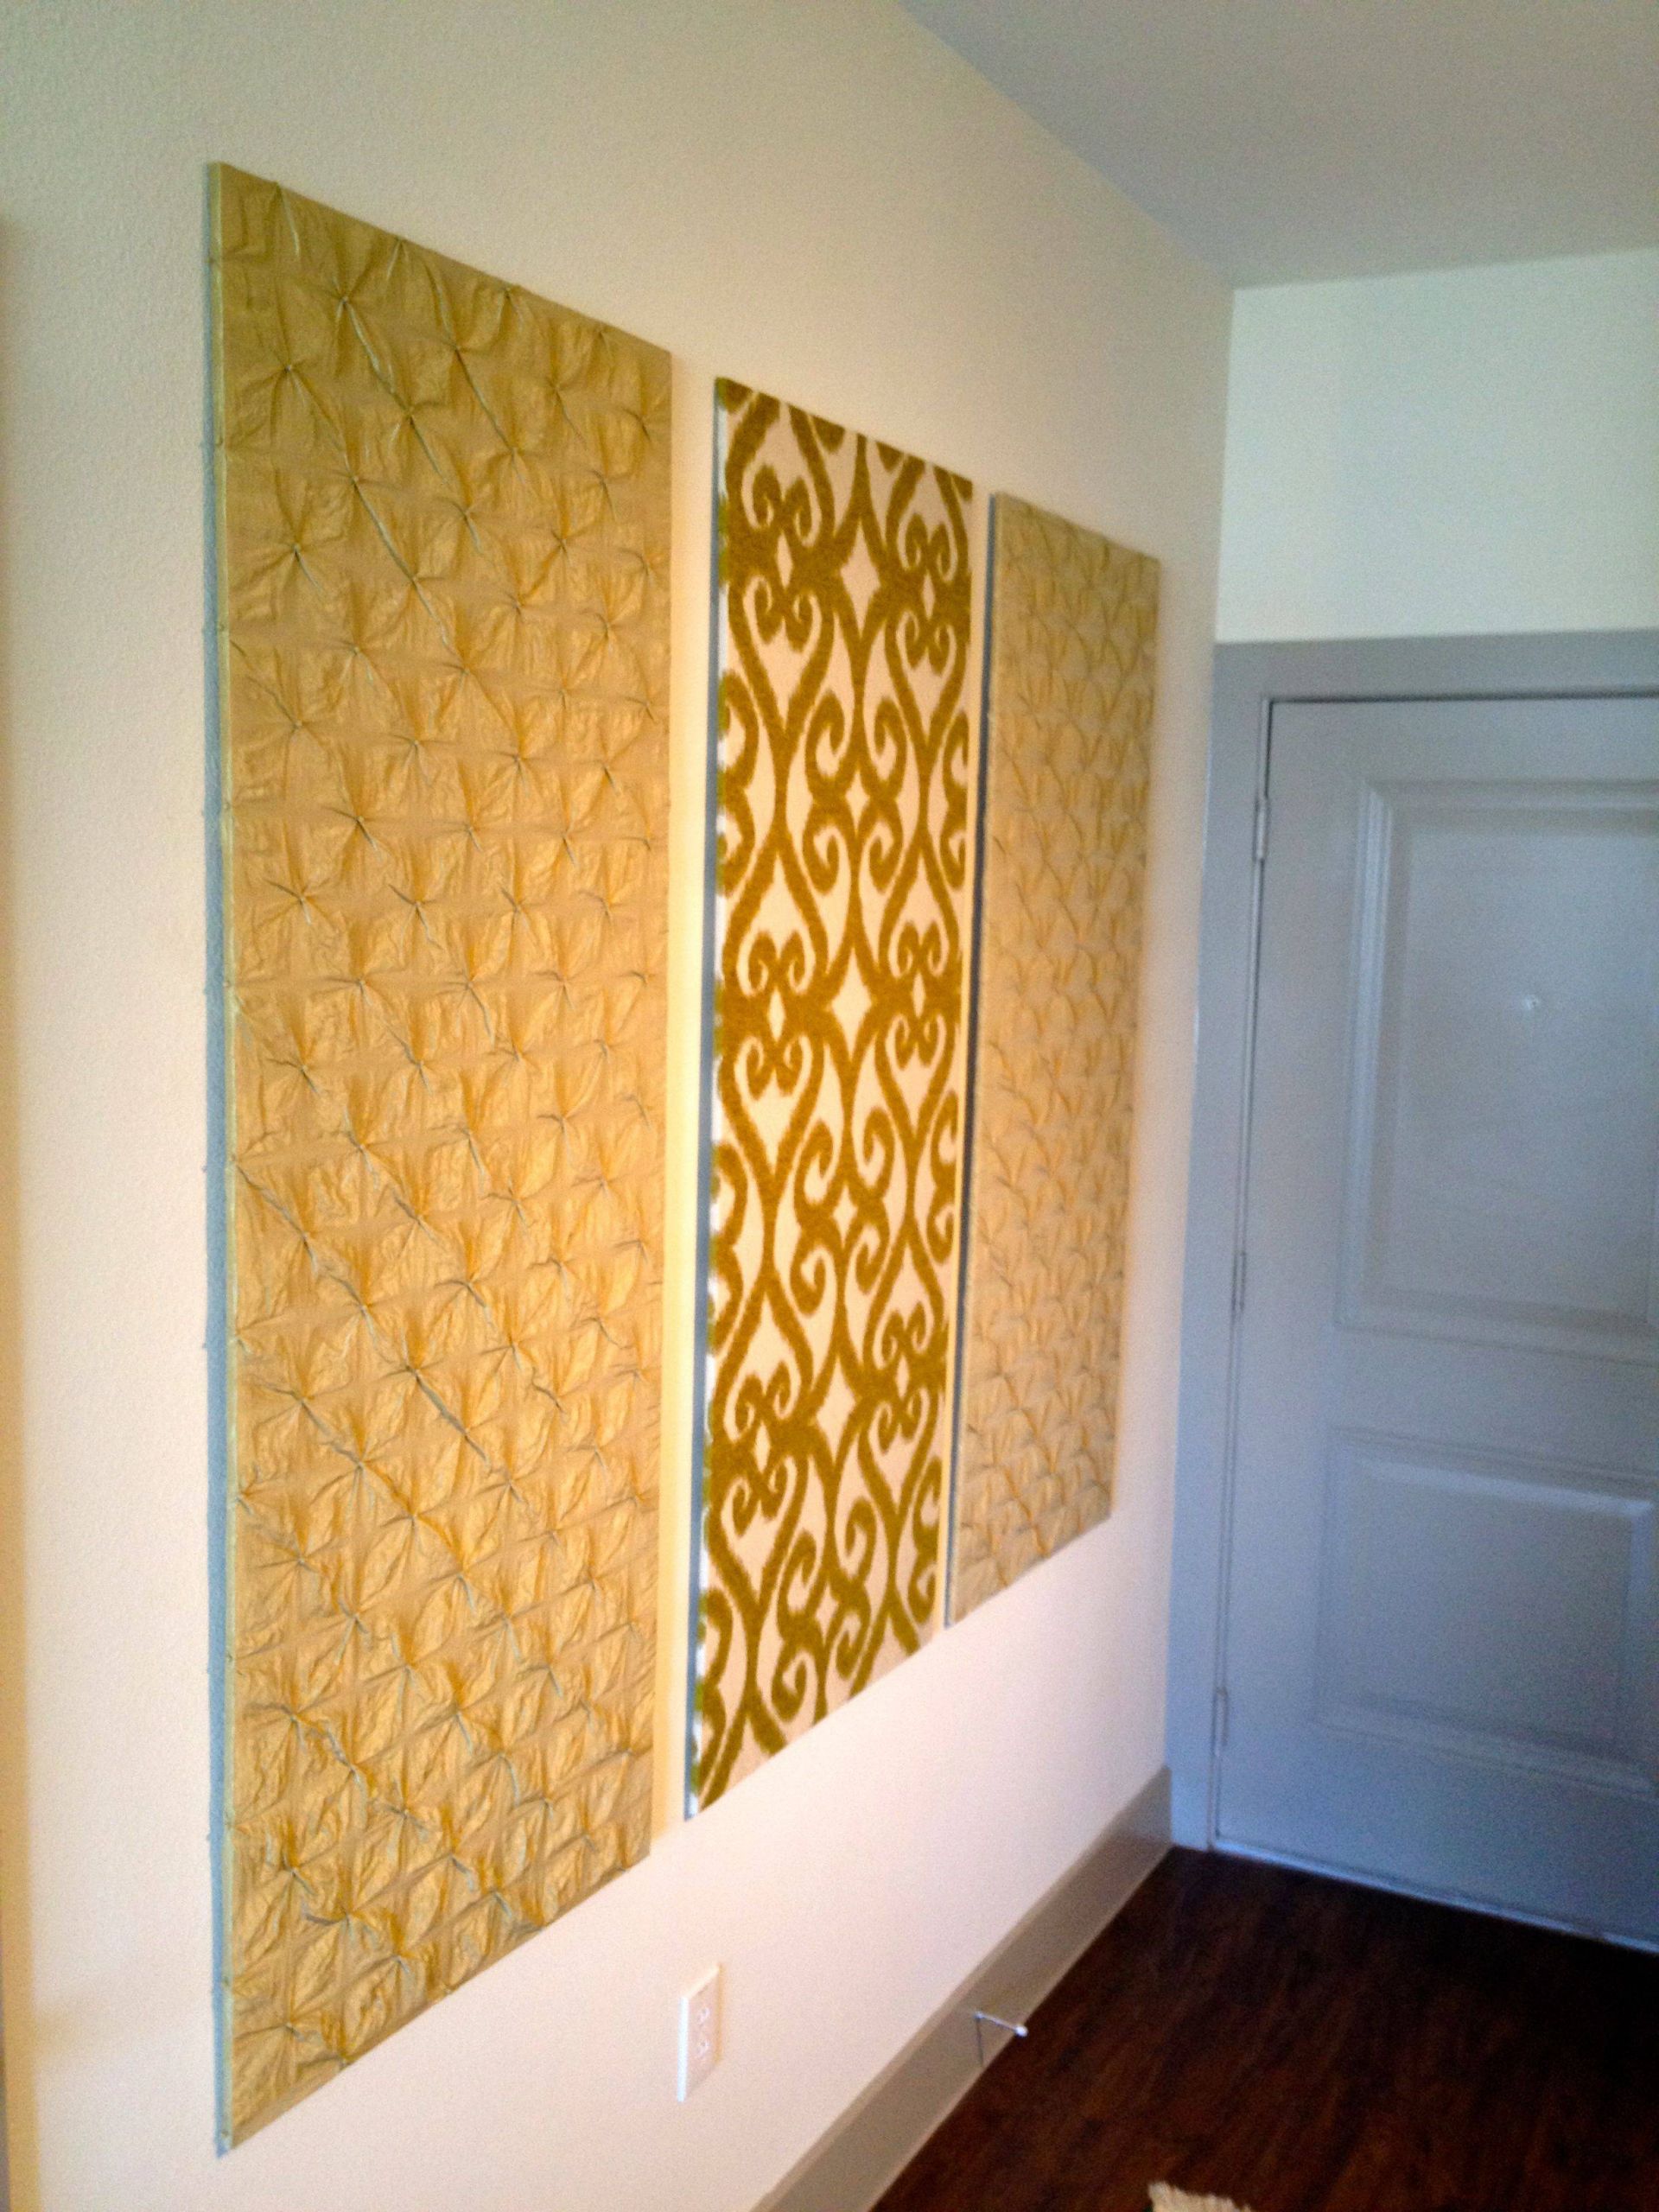 wall covering ideas luxury diy upholstered wall panels for an entry hallway of wall covering ideas